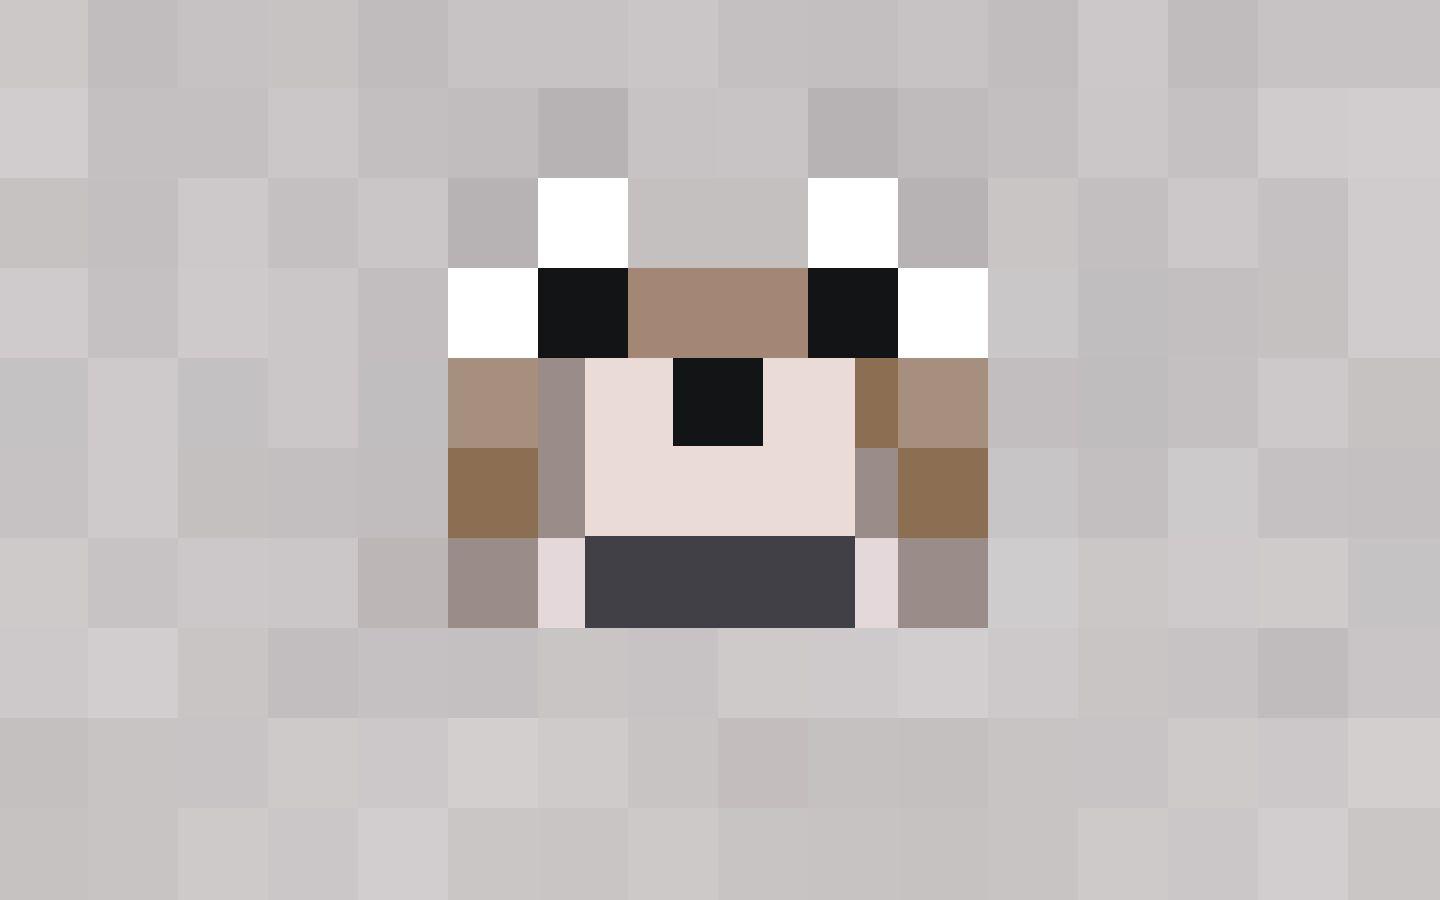 Cute Minecraft dog that can be used for tags or invitations